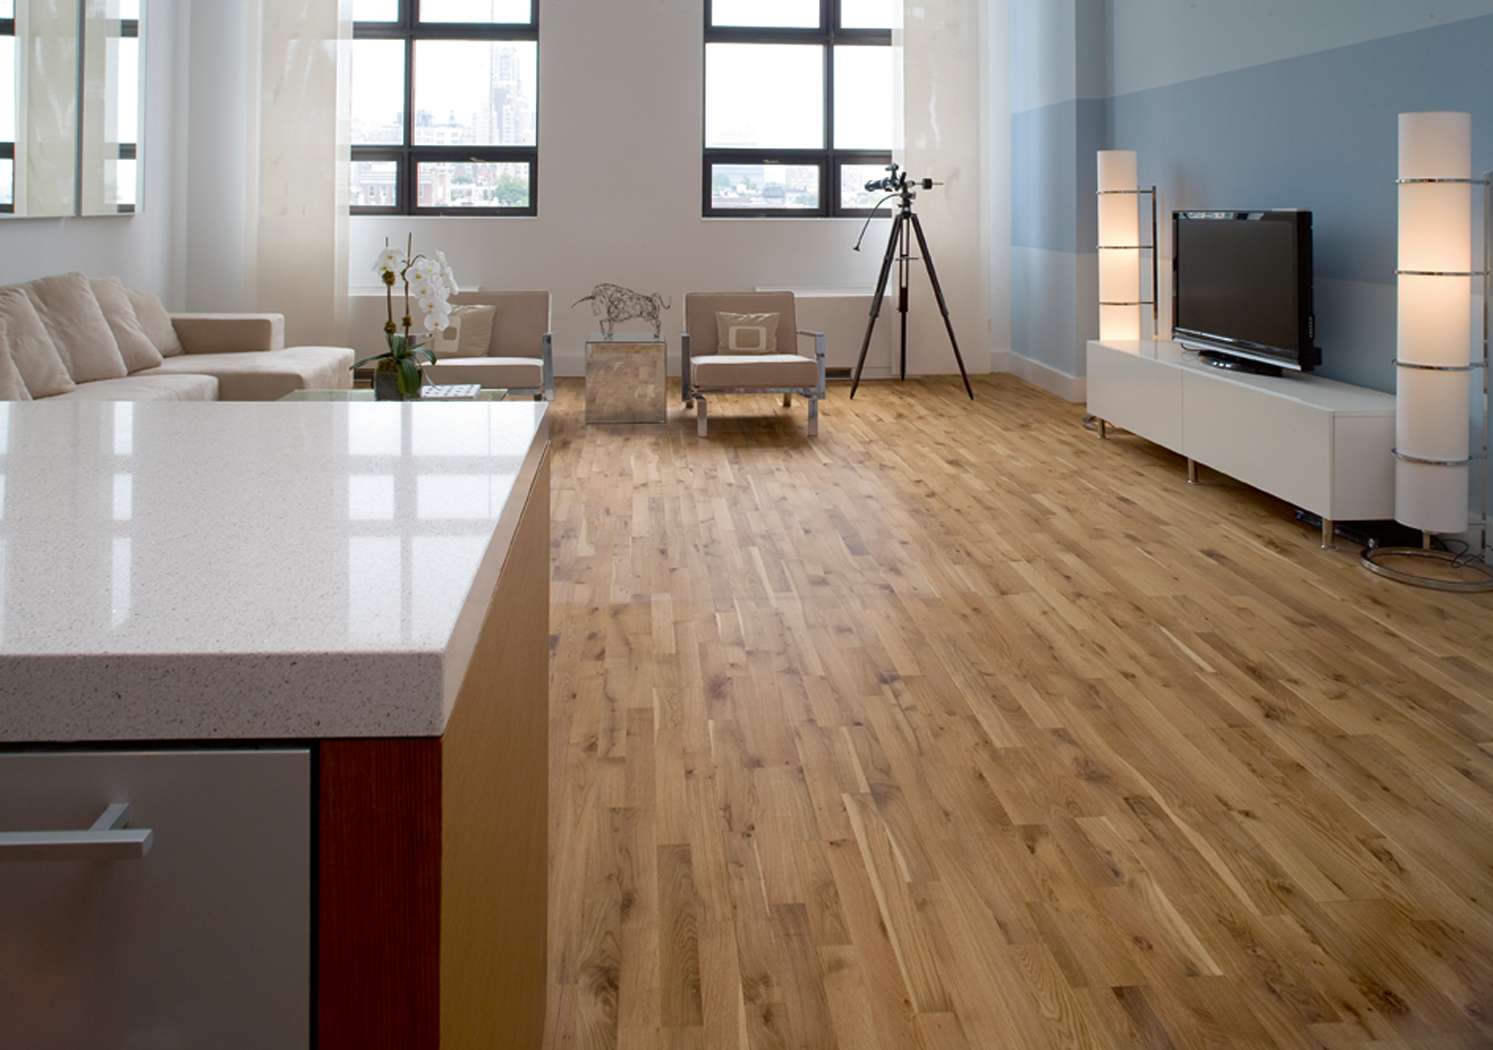 contemporary laminate wooden floors hardwood flooring cleaned with correct how to polish wood floors ideas at PQZPXHH